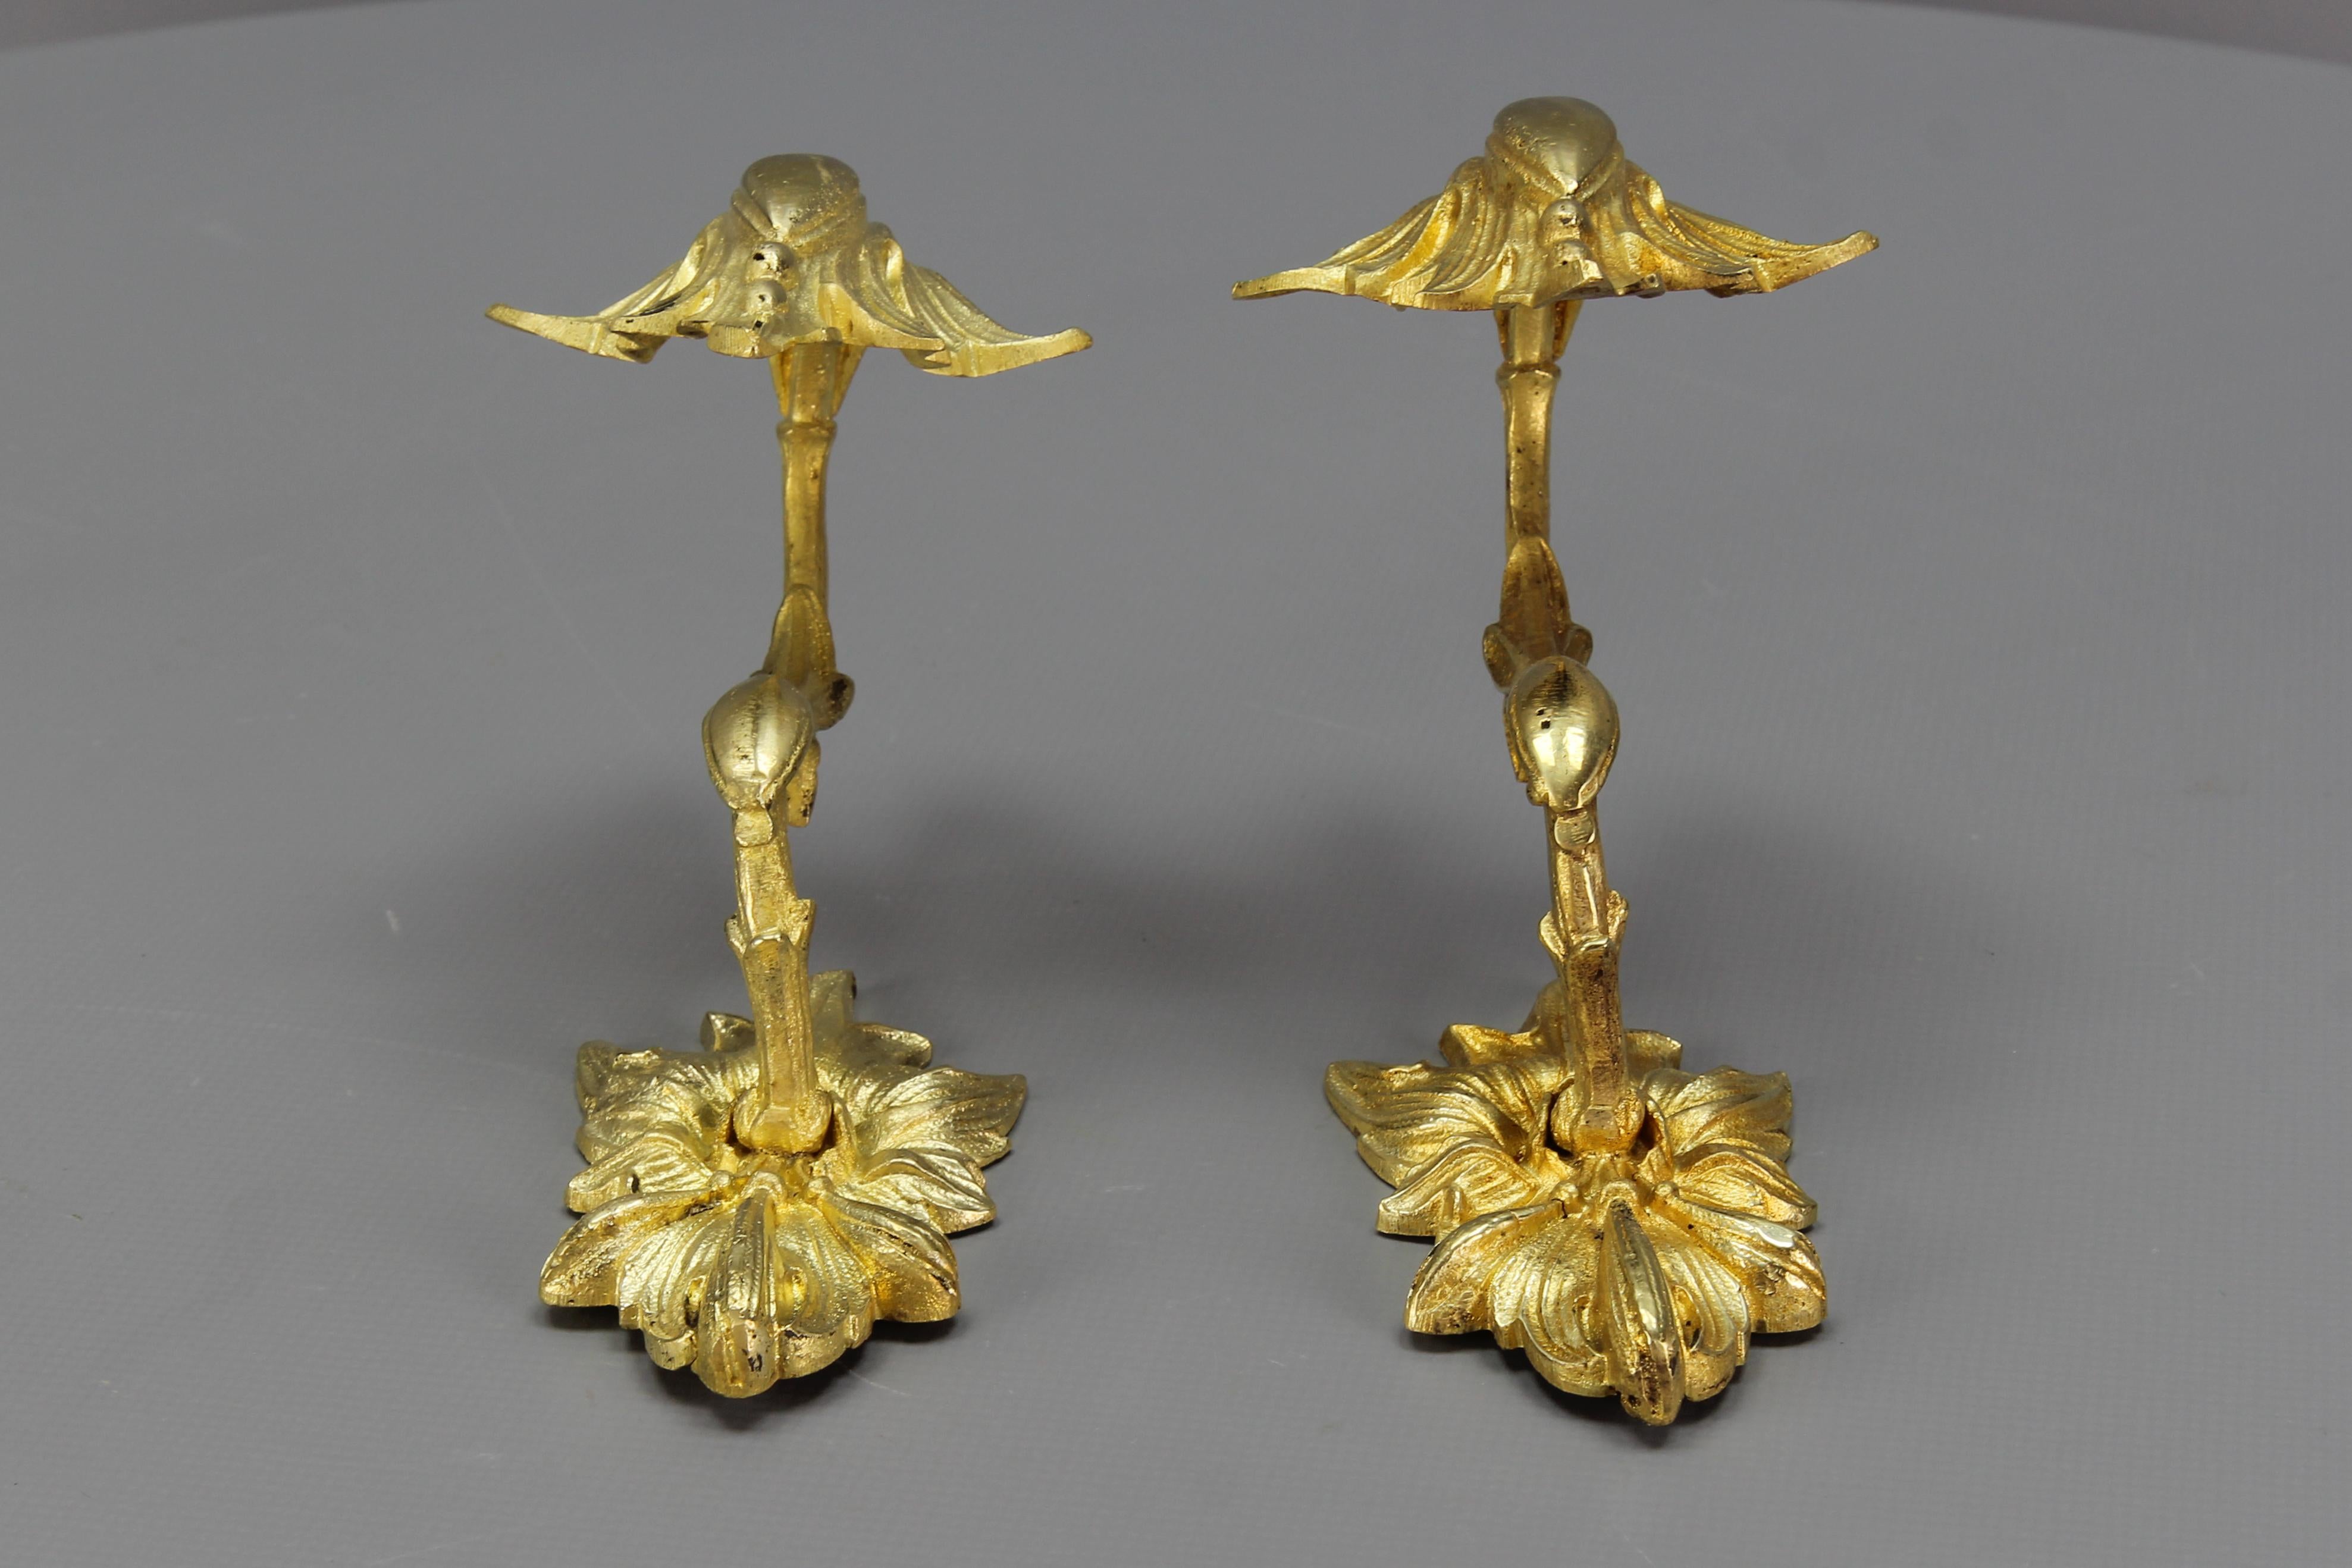 Pair of Antique French Bronze Curtain Tiebacks or Curtain Holders For Sale 1